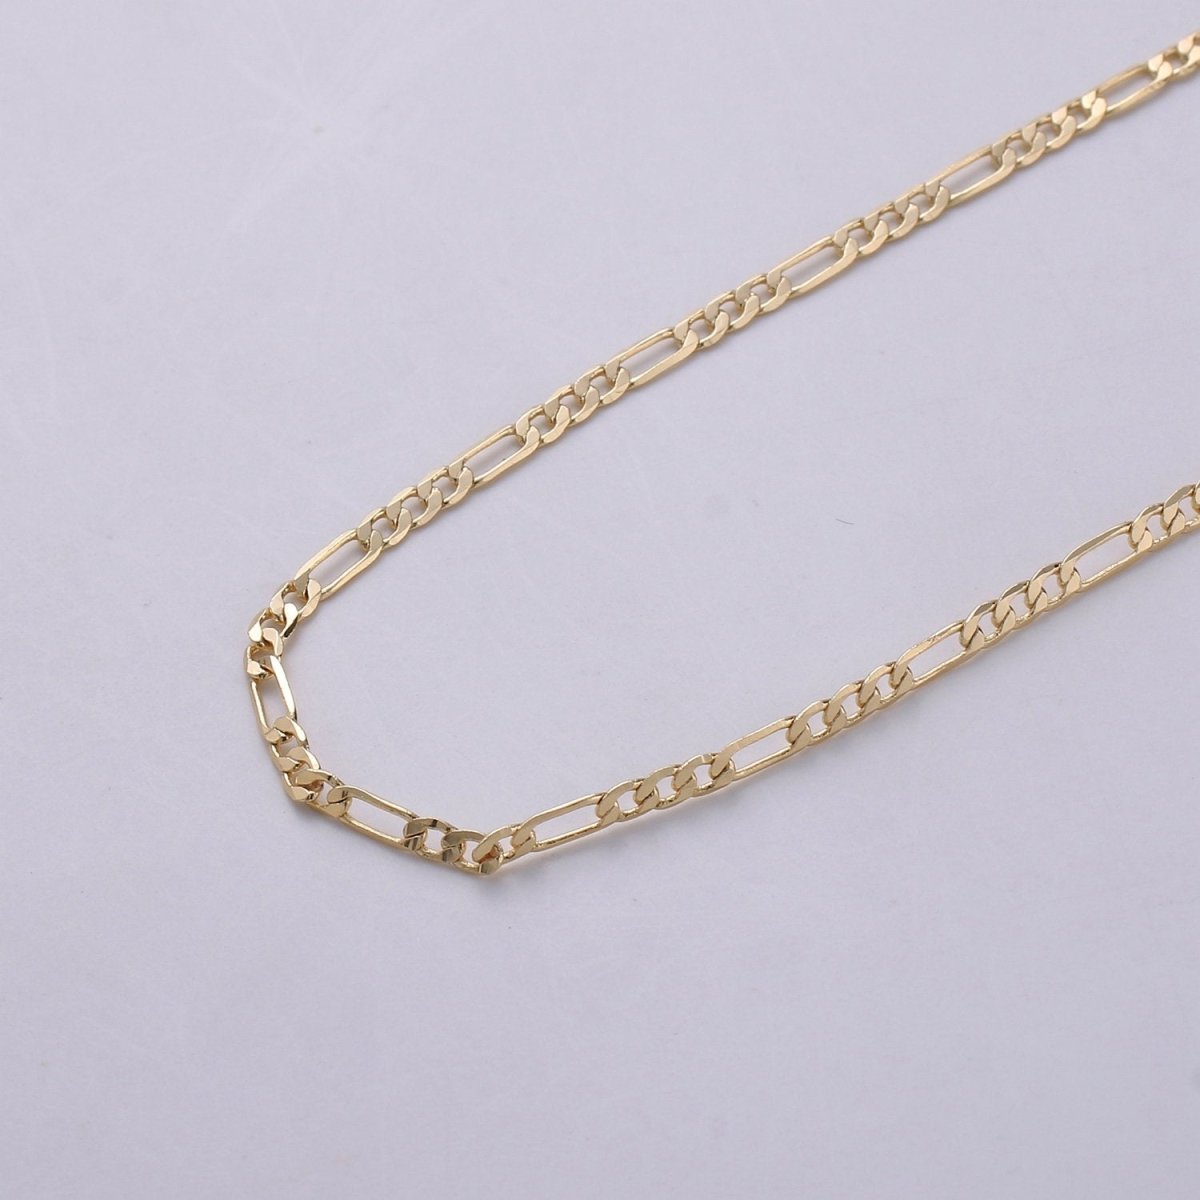 Dainty Figaro Chain 2.5mm width, 16K Gold Filled, brass chain by Yard, Nickel free, Thin Flat Minimalist Jewelry making, Necklace chain | ROLL-275 Clearance Pricing - DLUXCA